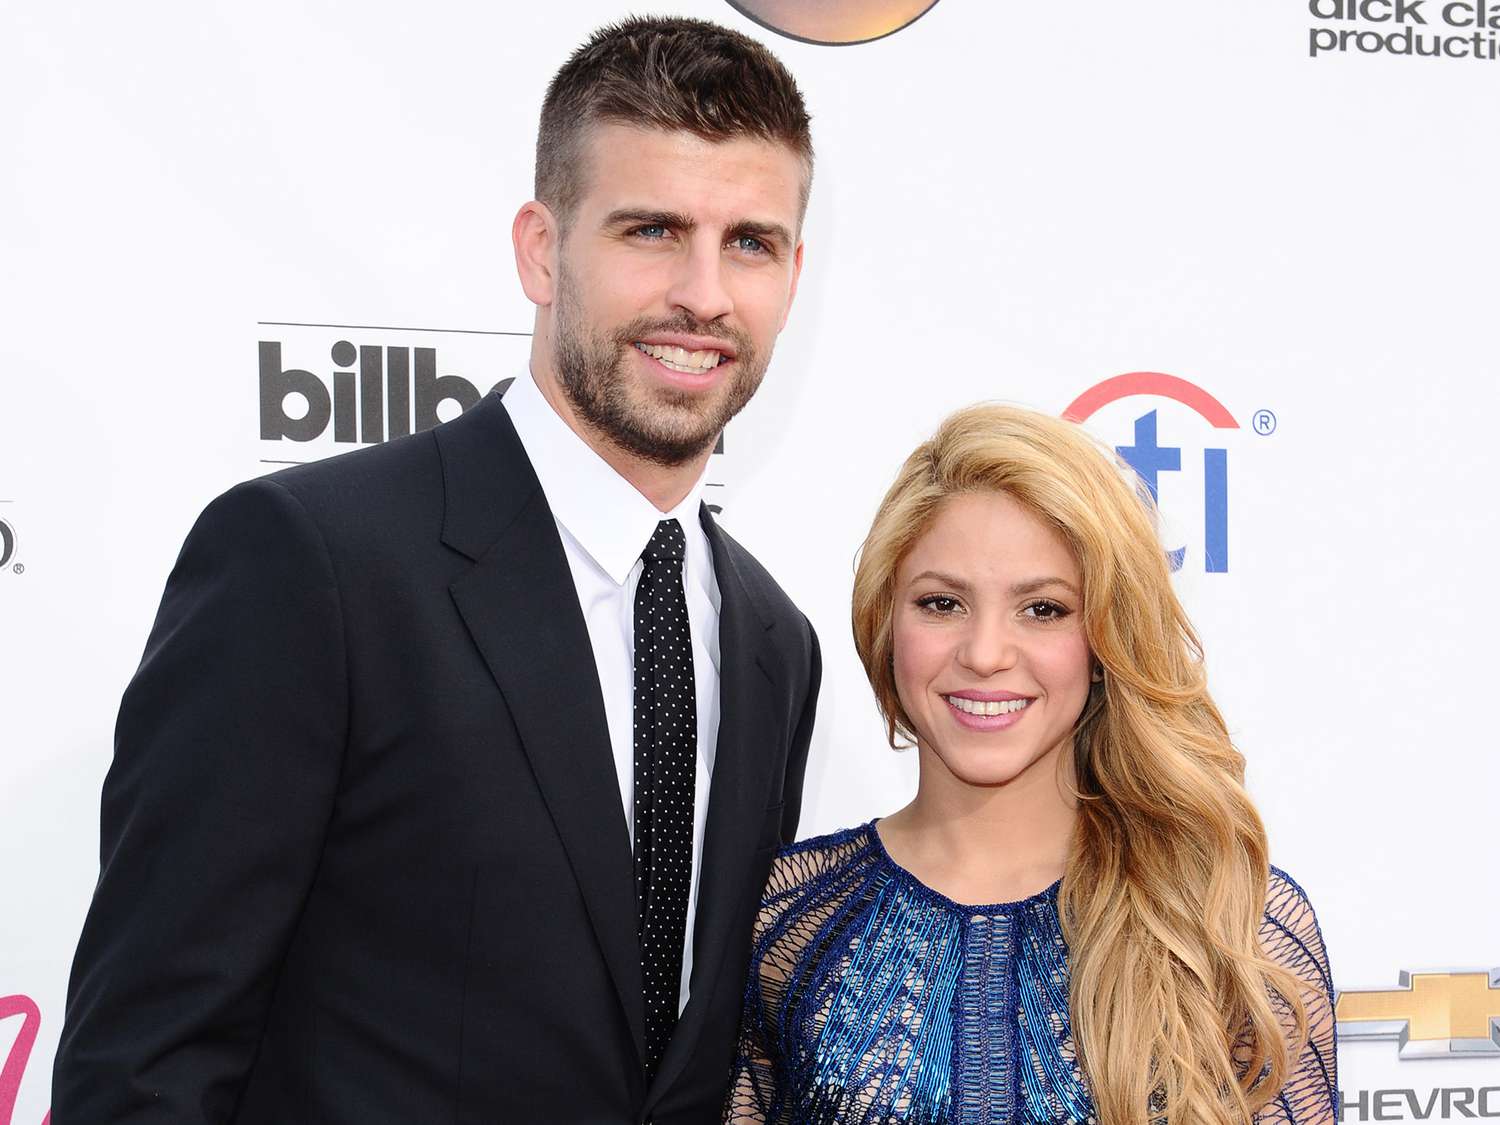 Gerard Pique and Shakira in 2018.